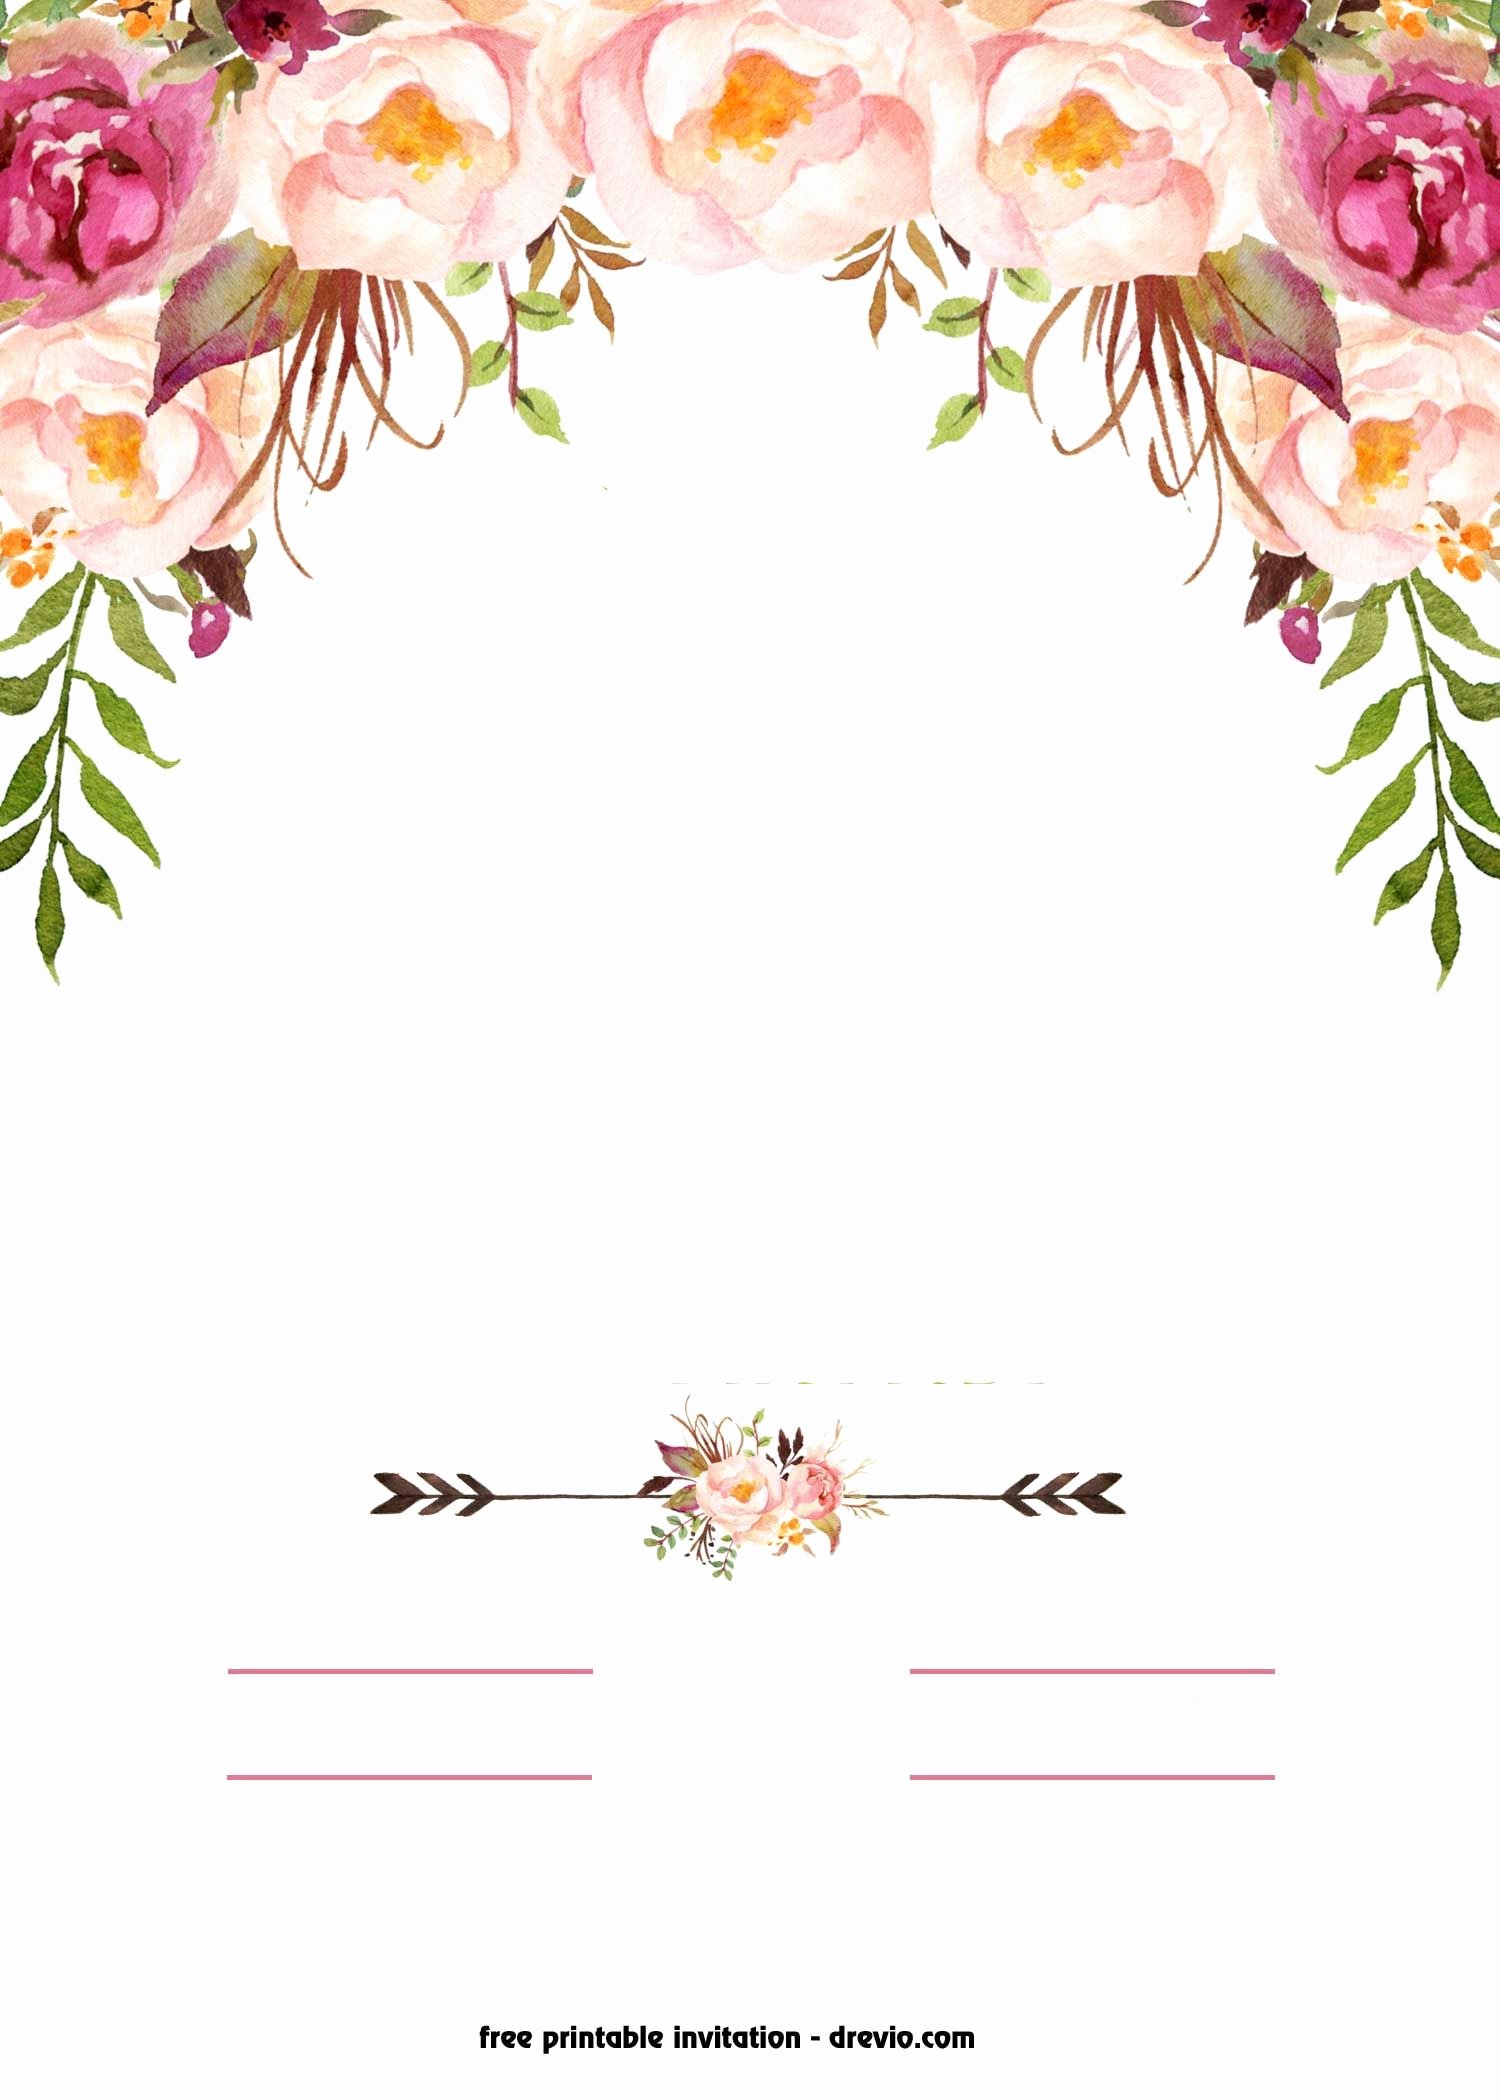 Flower Invitation Template Awesome Free Printable Boho Chic Flower Baby Shower Invitation